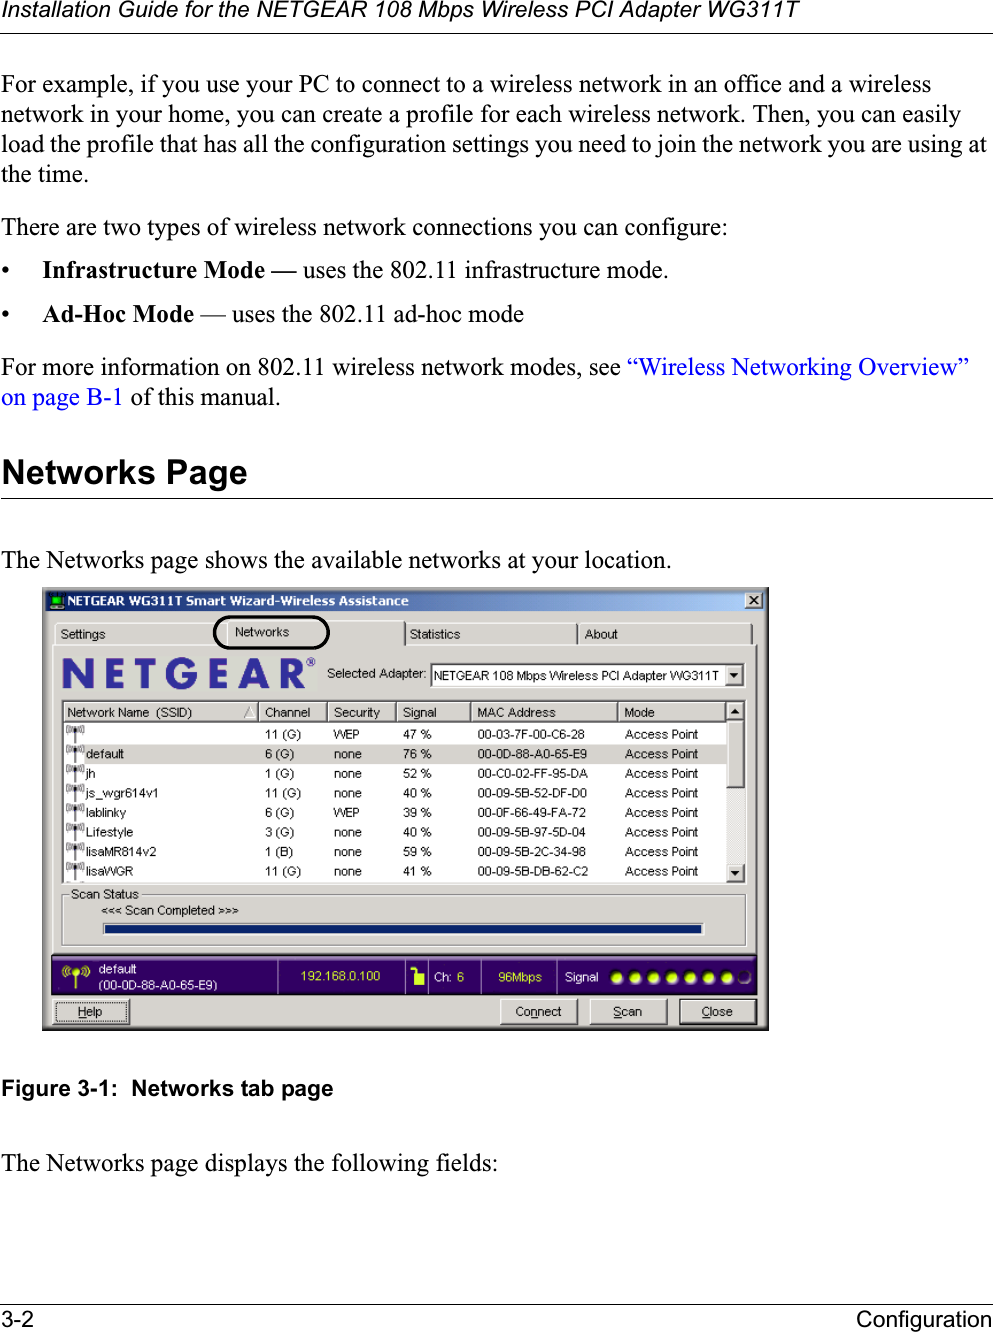 Installation Guide for the NETGEAR 108 Mbps Wireless PCI Adapter WG311T3-2 ConfigurationFor example, if you use your PC to connect to a wireless network in an office and a wireless network in your home, you can create a profile for each wireless network. Then, you can easily load the profile that has all the configuration settings you need to join the network you are using at the time. There are two types of wireless network connections you can configure:•Infrastructure Mode — uses the 802.11 infrastructure mode.•Ad-Hoc Mode — uses the 802.11 ad-hoc modeFor more information on 802.11 wireless network modes, see “Wireless Networking Overview” on page B-1 of this manual.Networks PageThe Networks page shows the available networks at your location.Figure 3-1:  Networks tab pageThe Networks page displays the following fields: